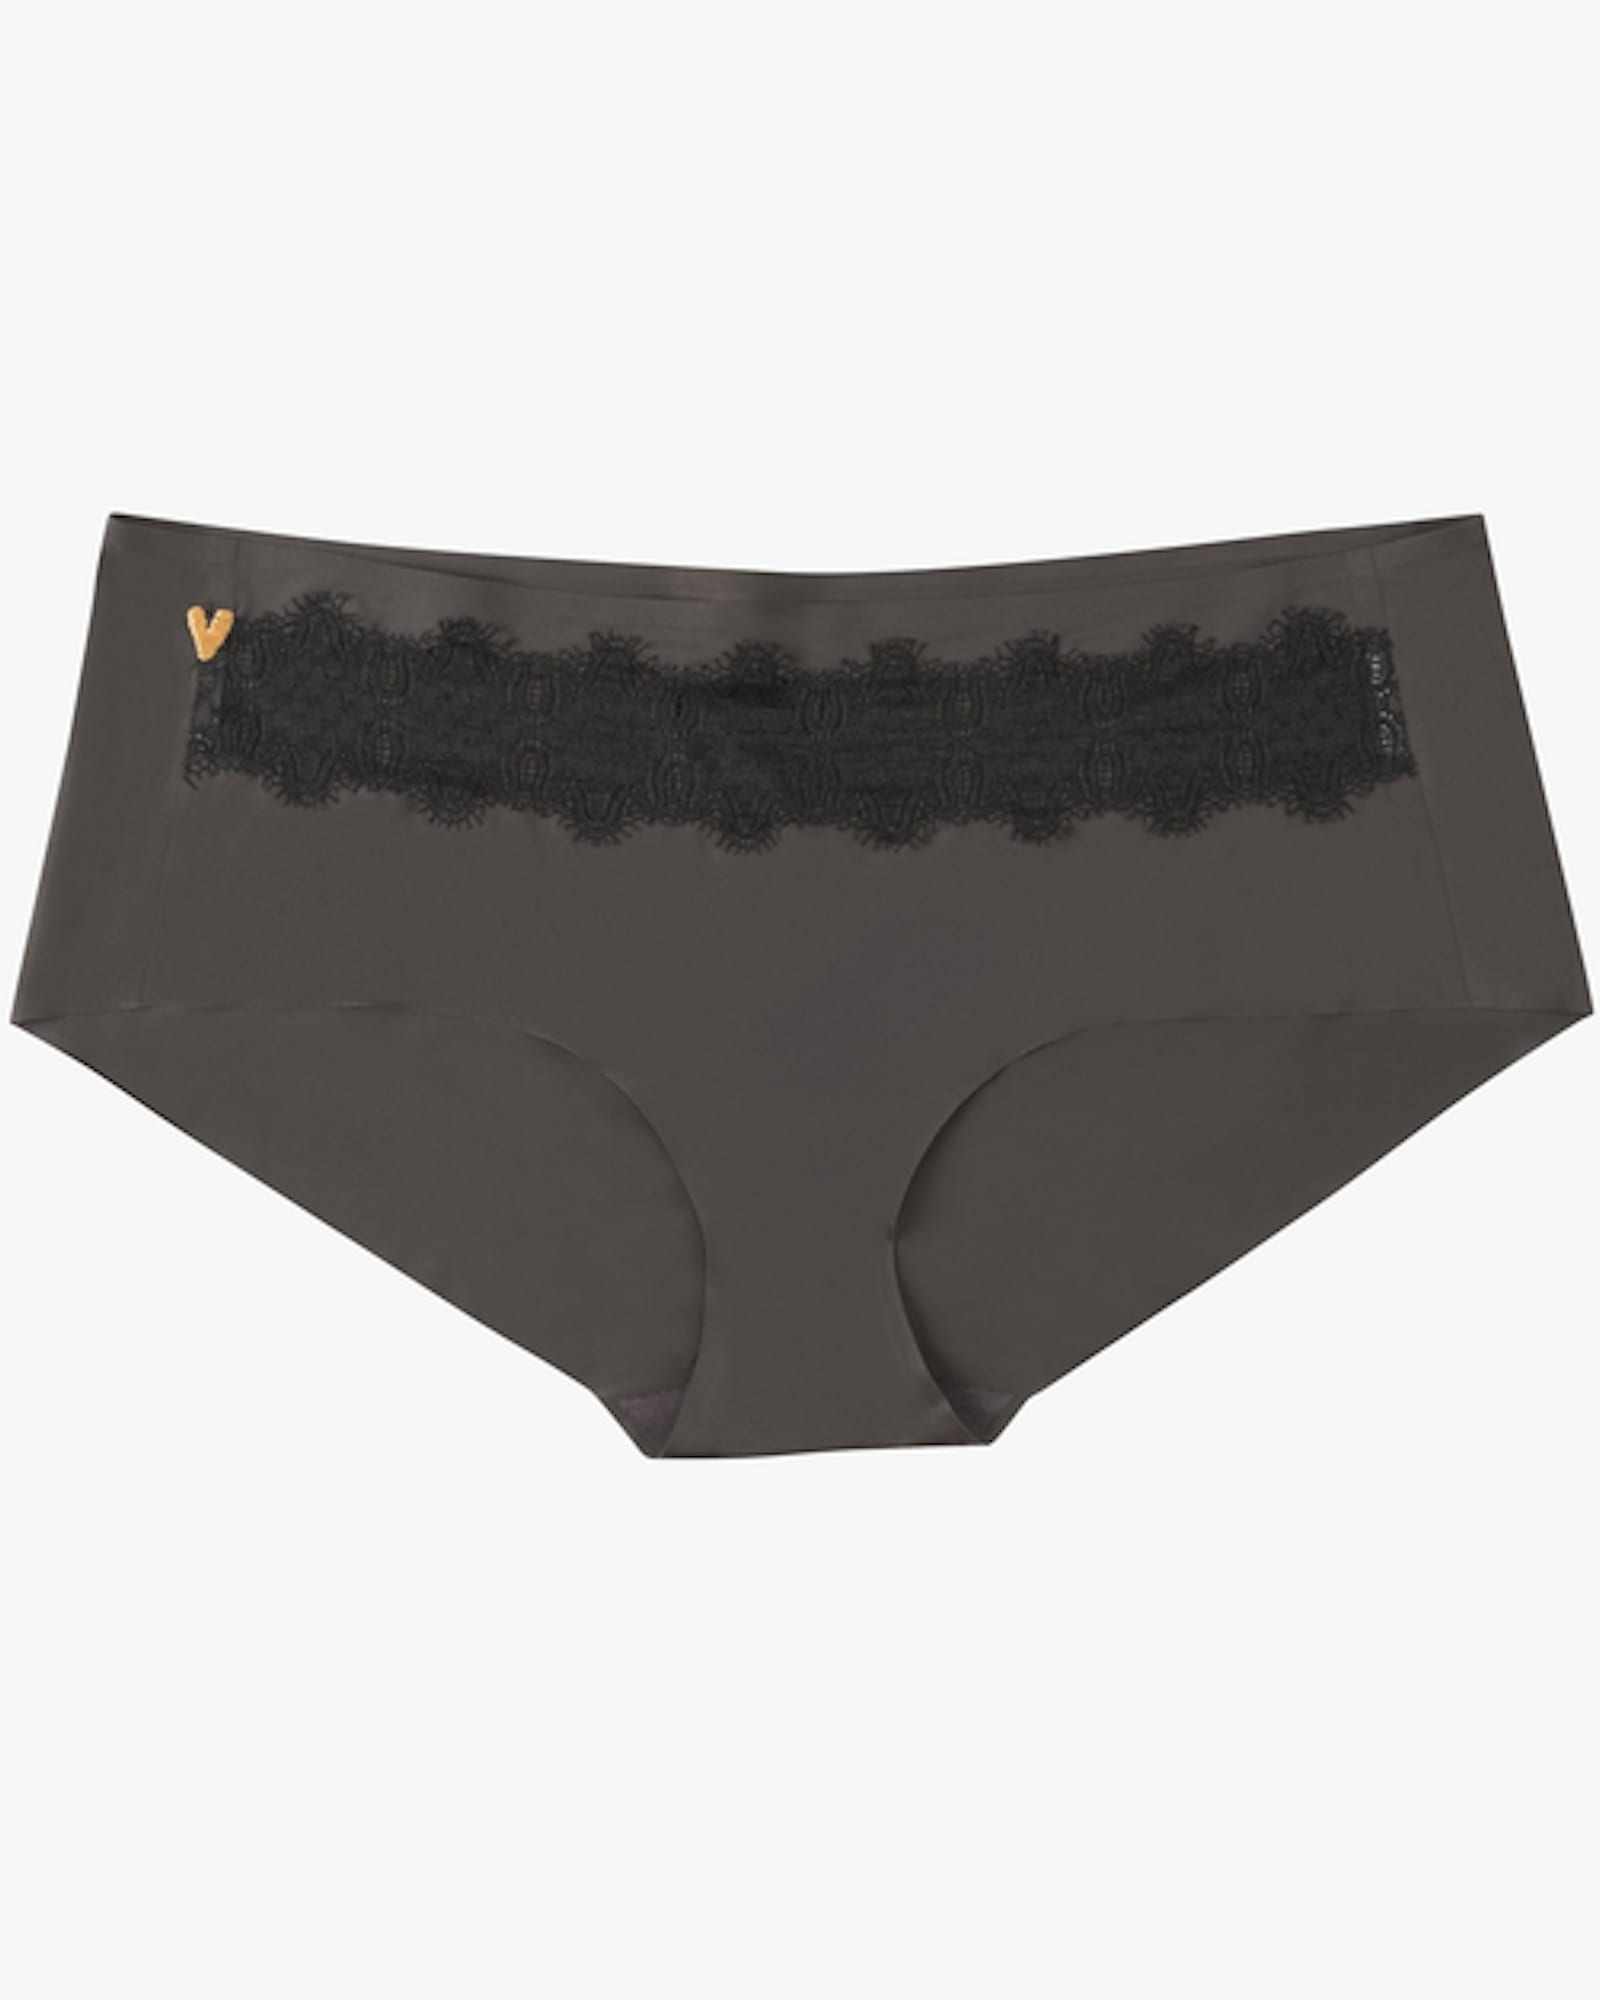 Seamless Underwear Happy Seams | Shale with Tap Shoe Black